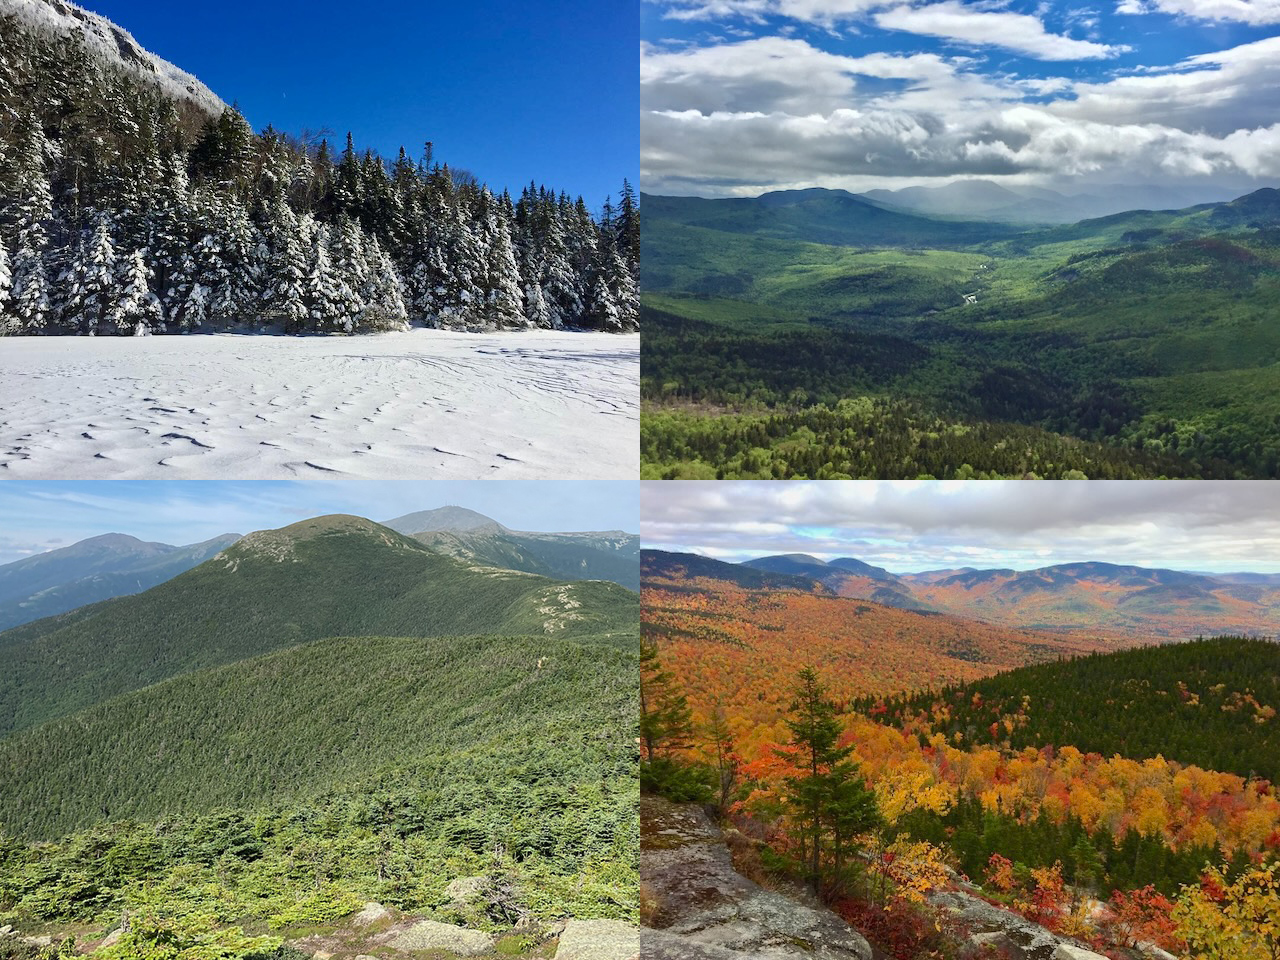 Some of my photos from the White Mountains during each season